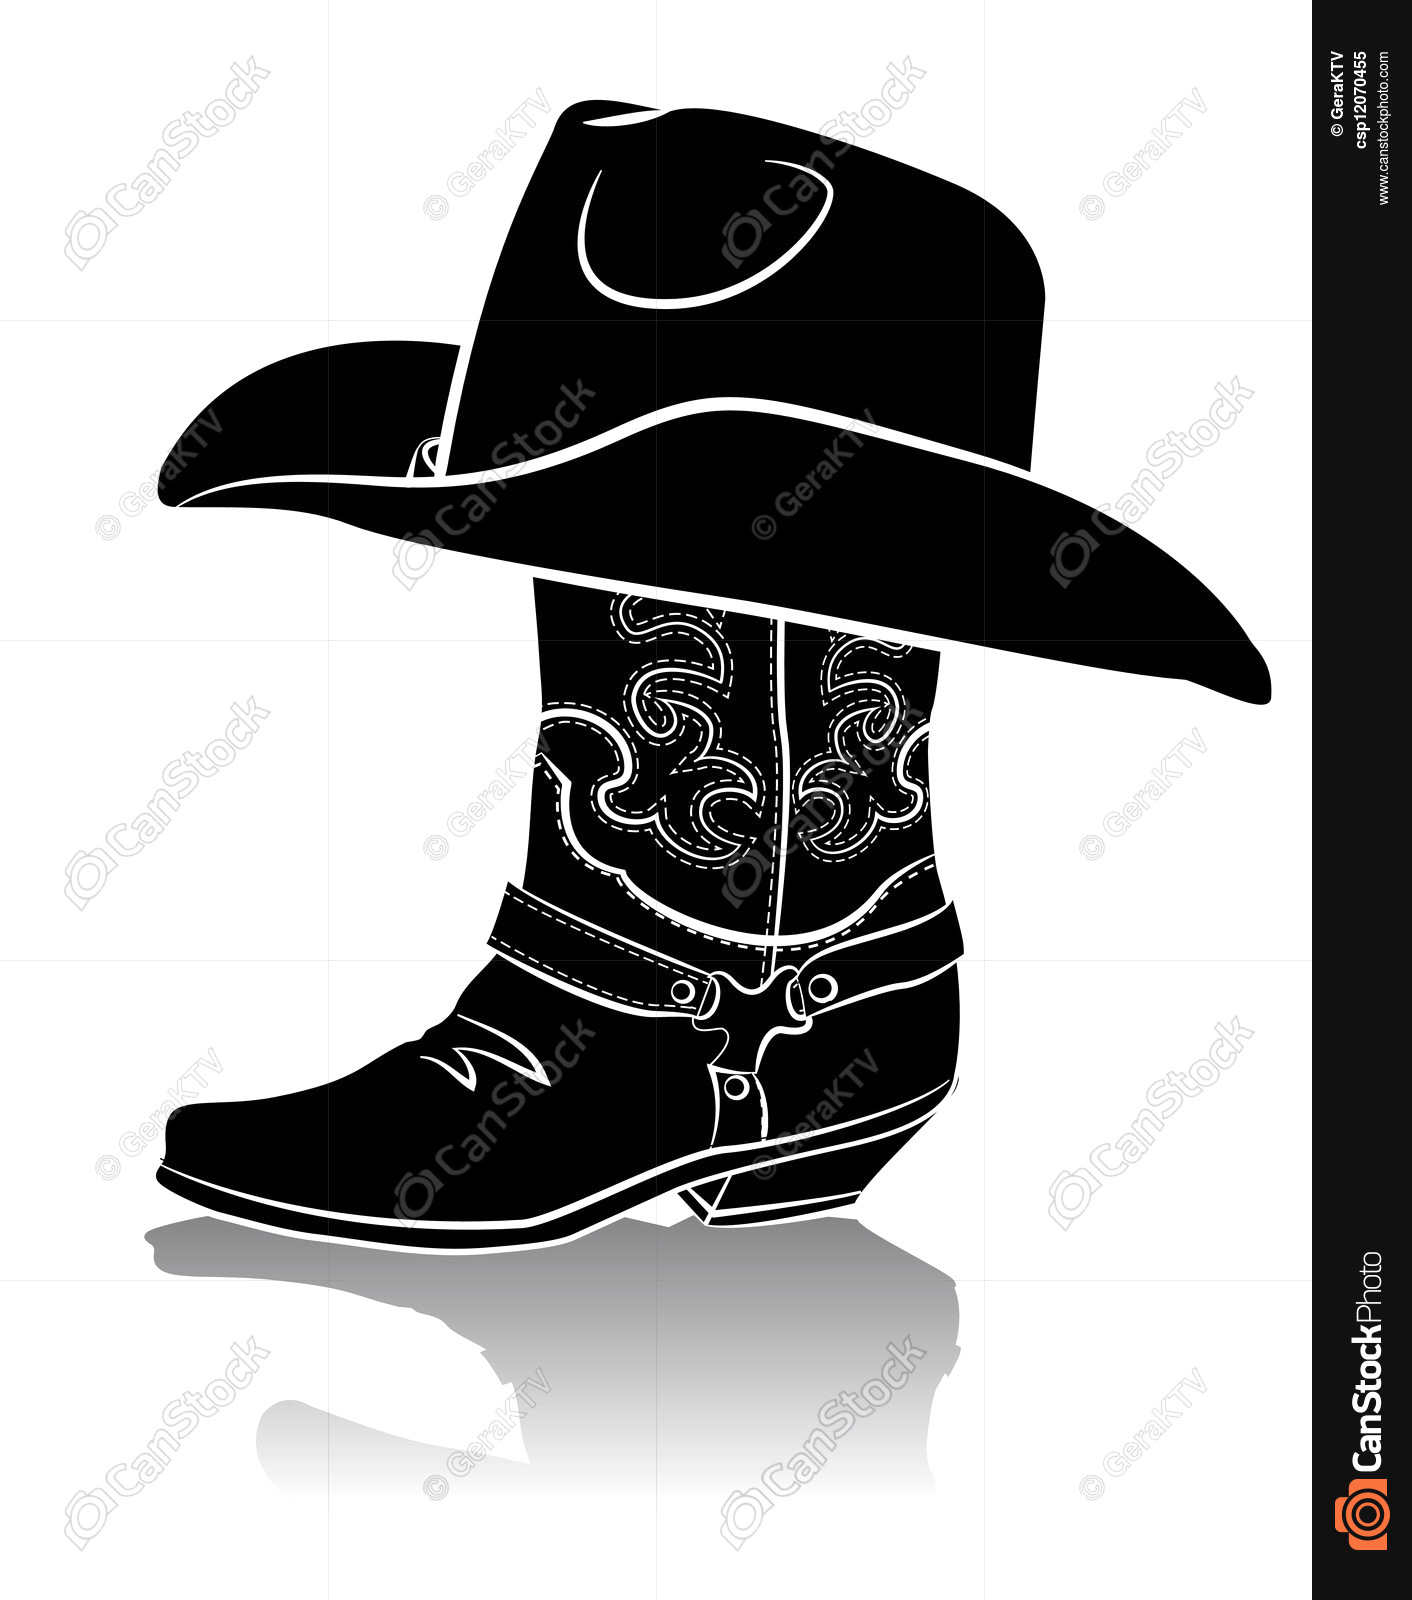 Cowboy Clipart african american